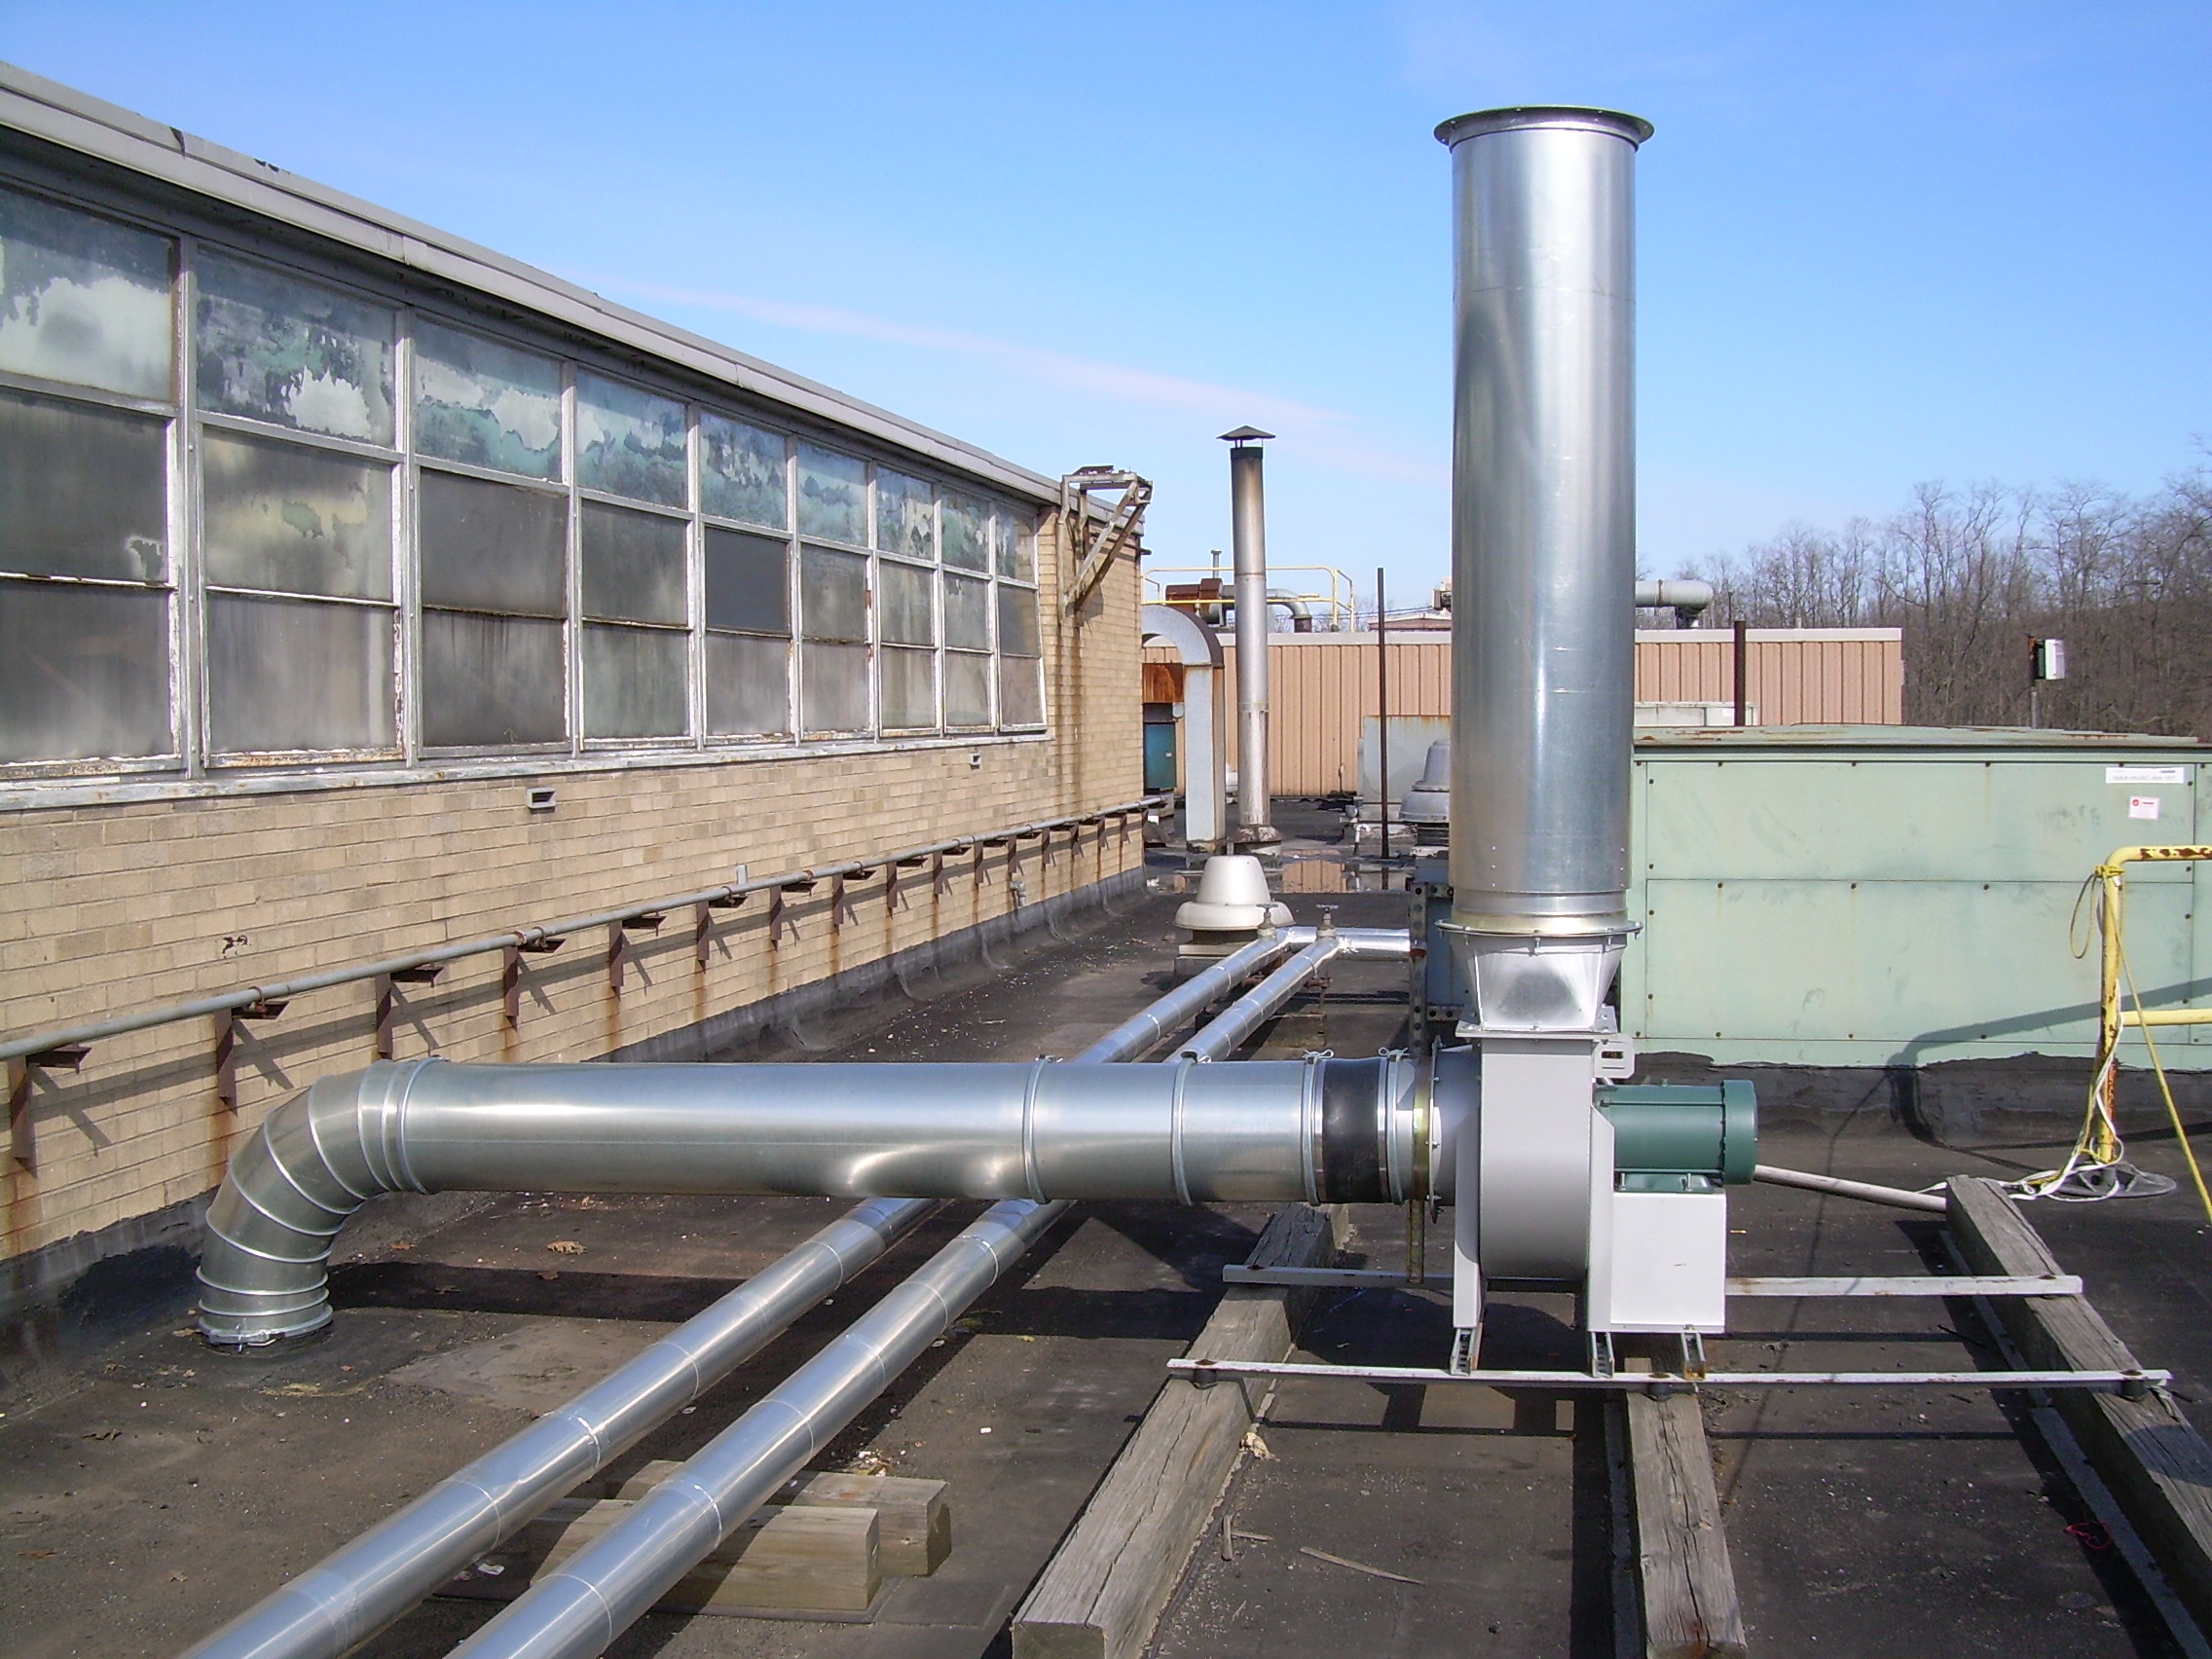 Fume System Ductwork - Using “clamp together” duct and fittings on a roof-mounted fan minimized installation time and allowed for future movement of the system if necessary.